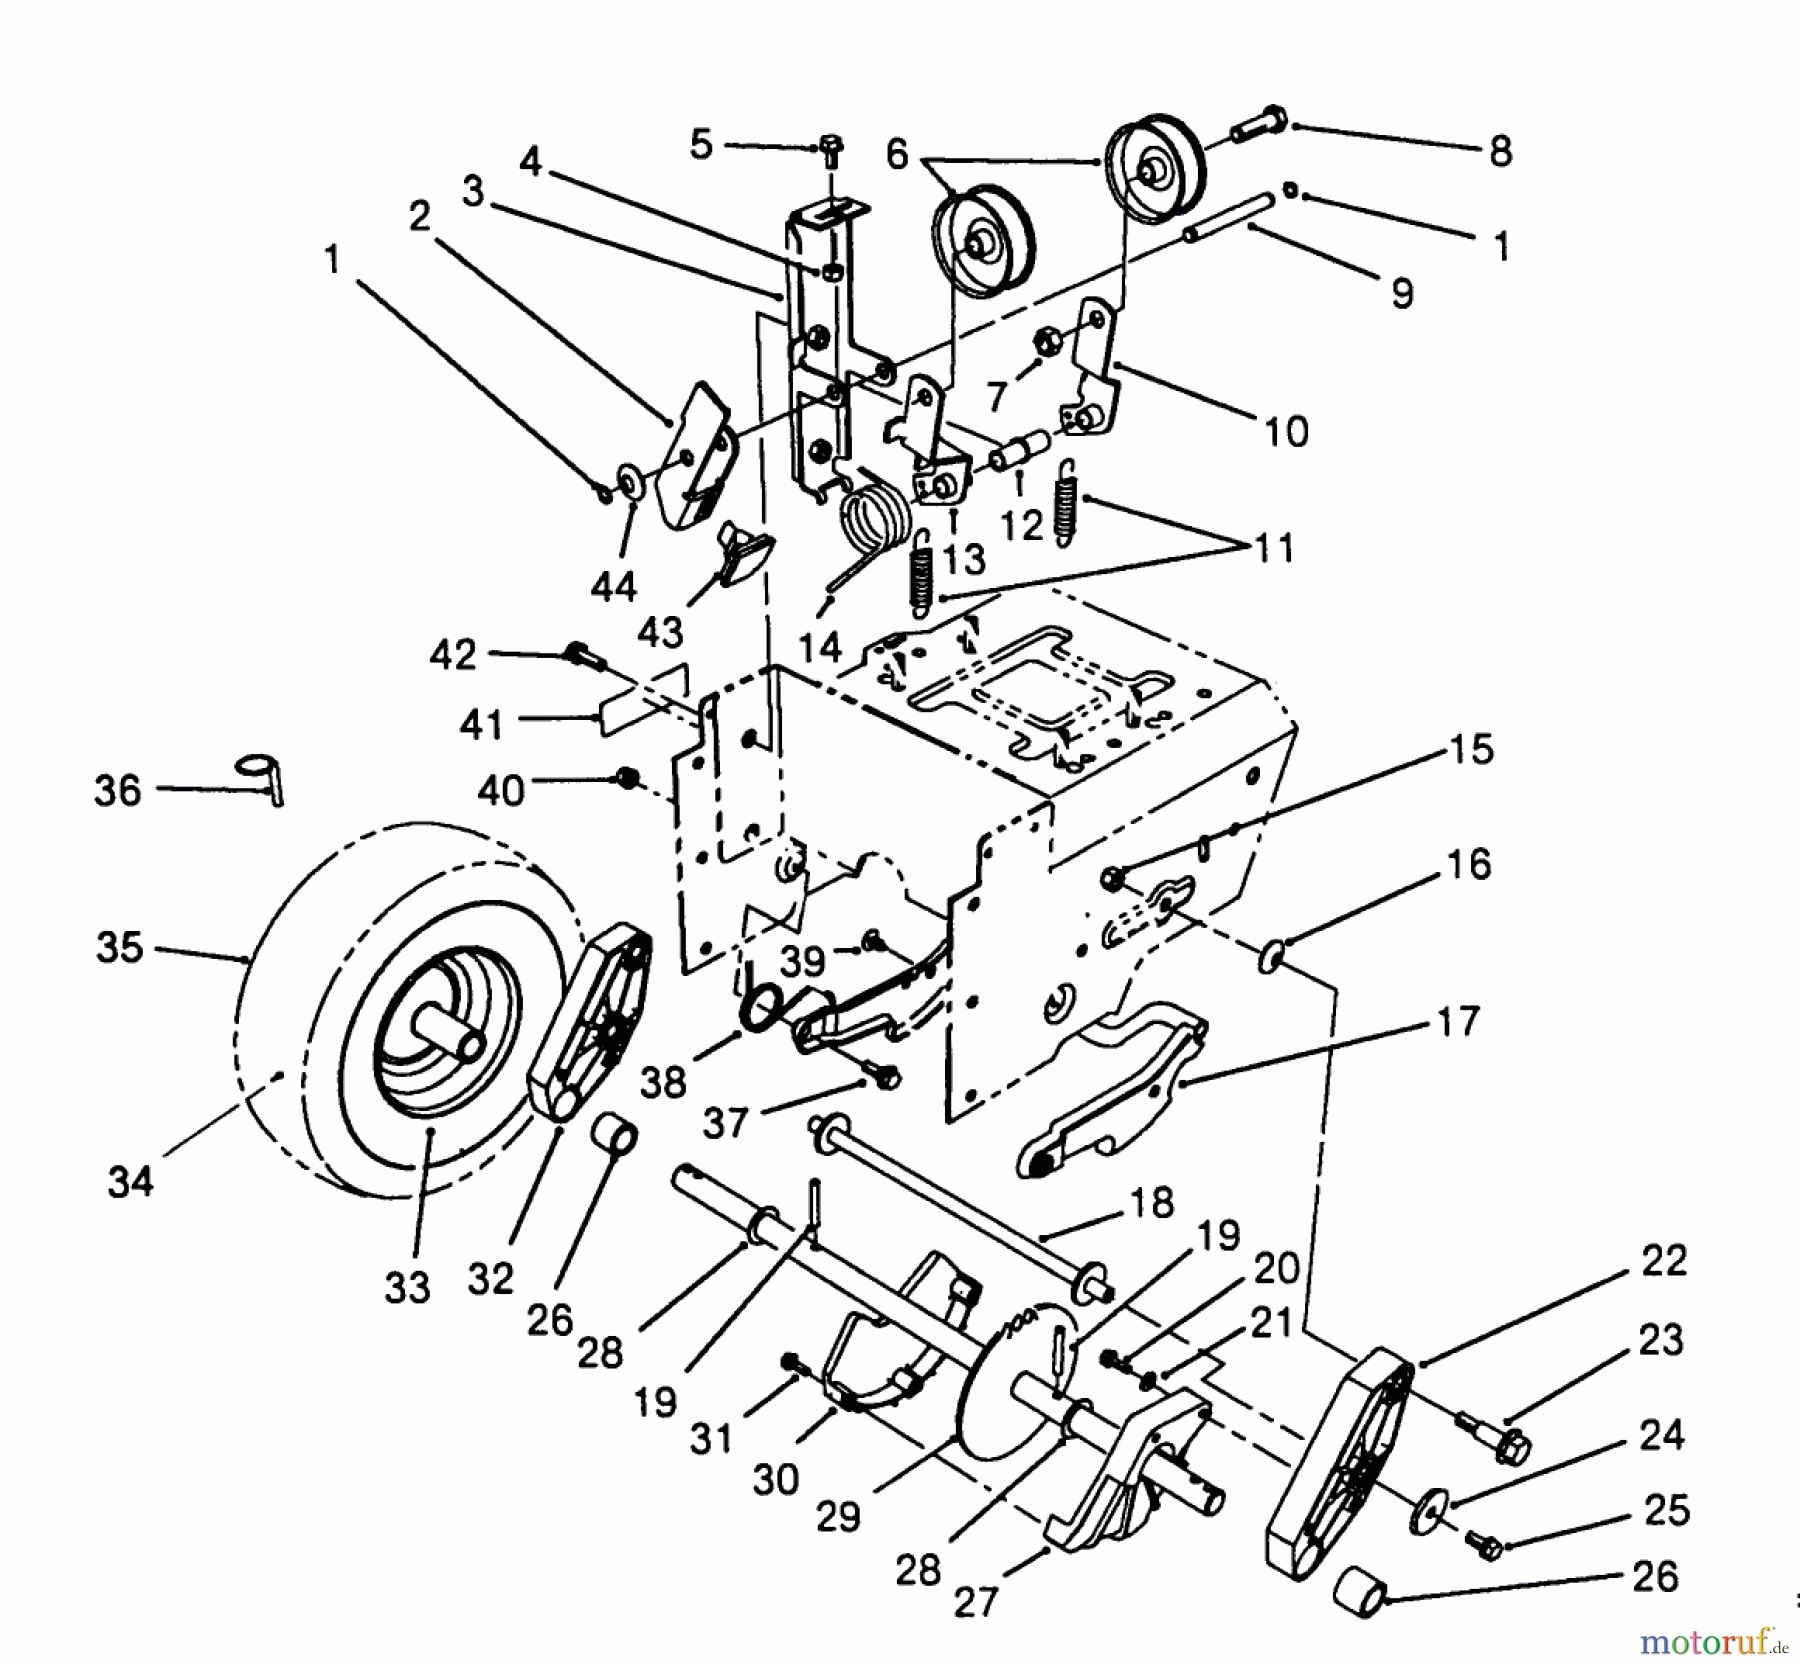  Toro Neu Snow Blowers/Snow Throwers Seite 1 38513 (624) - Toro 624 Power Shift Snowthrower, 1988 (8000001-8999999) TRACTION DRIVE ASSEMBLY